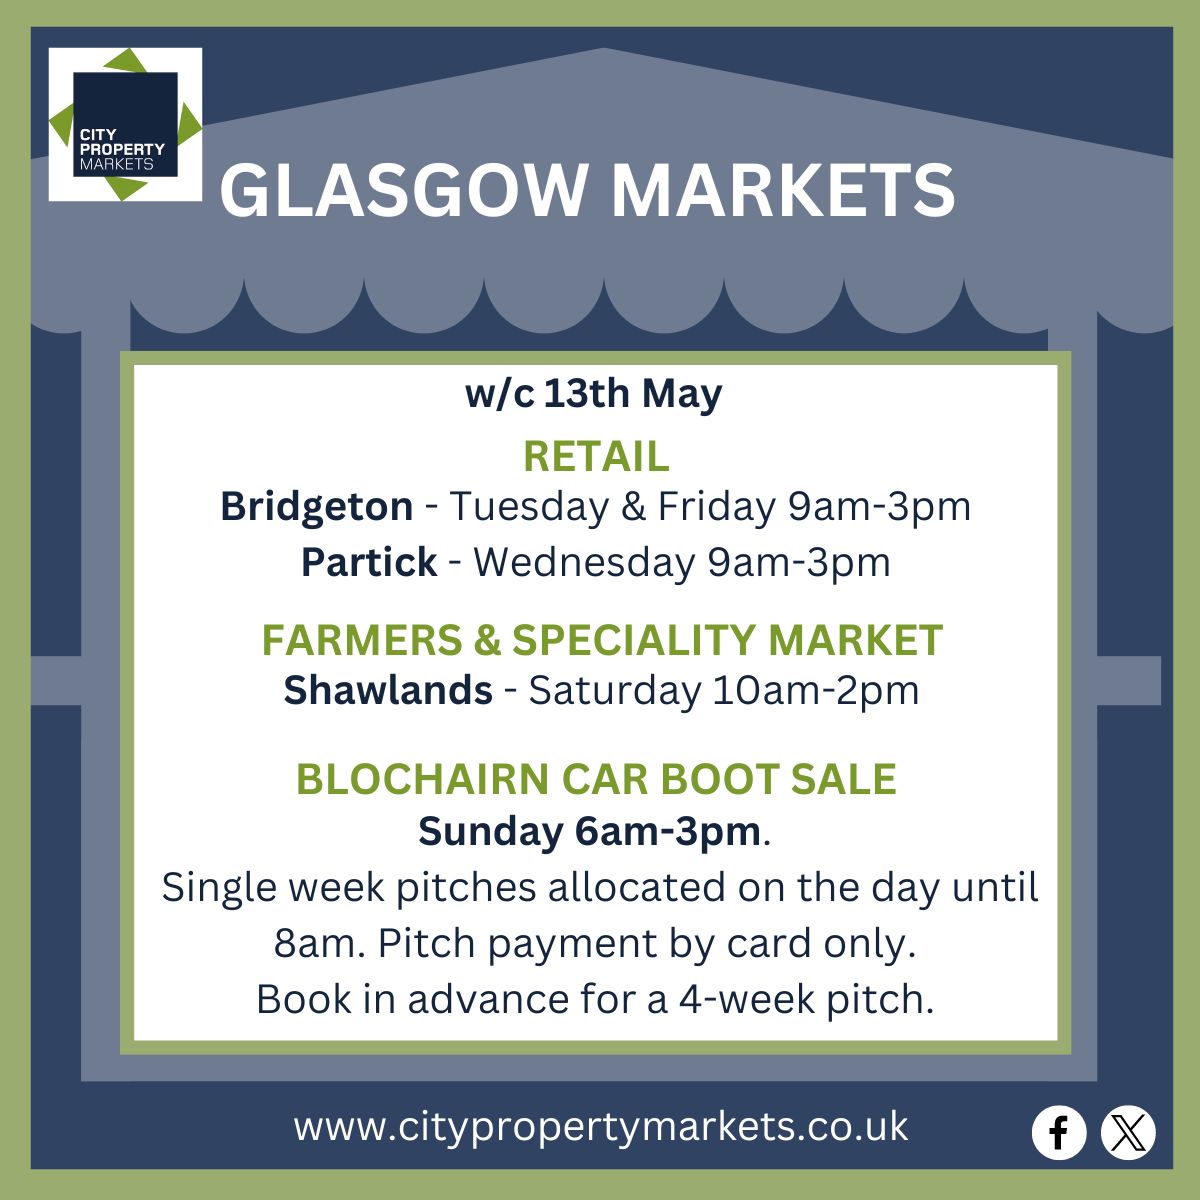 For more details about our Glasgow Markets, see citypropertymarkets.co.uk #CityPropertyMarkets #GlasgowMarkets #Glasgow #ShopLocal #WhatsOnGlasgow  
Details correct at time of publication, but may be subject to change